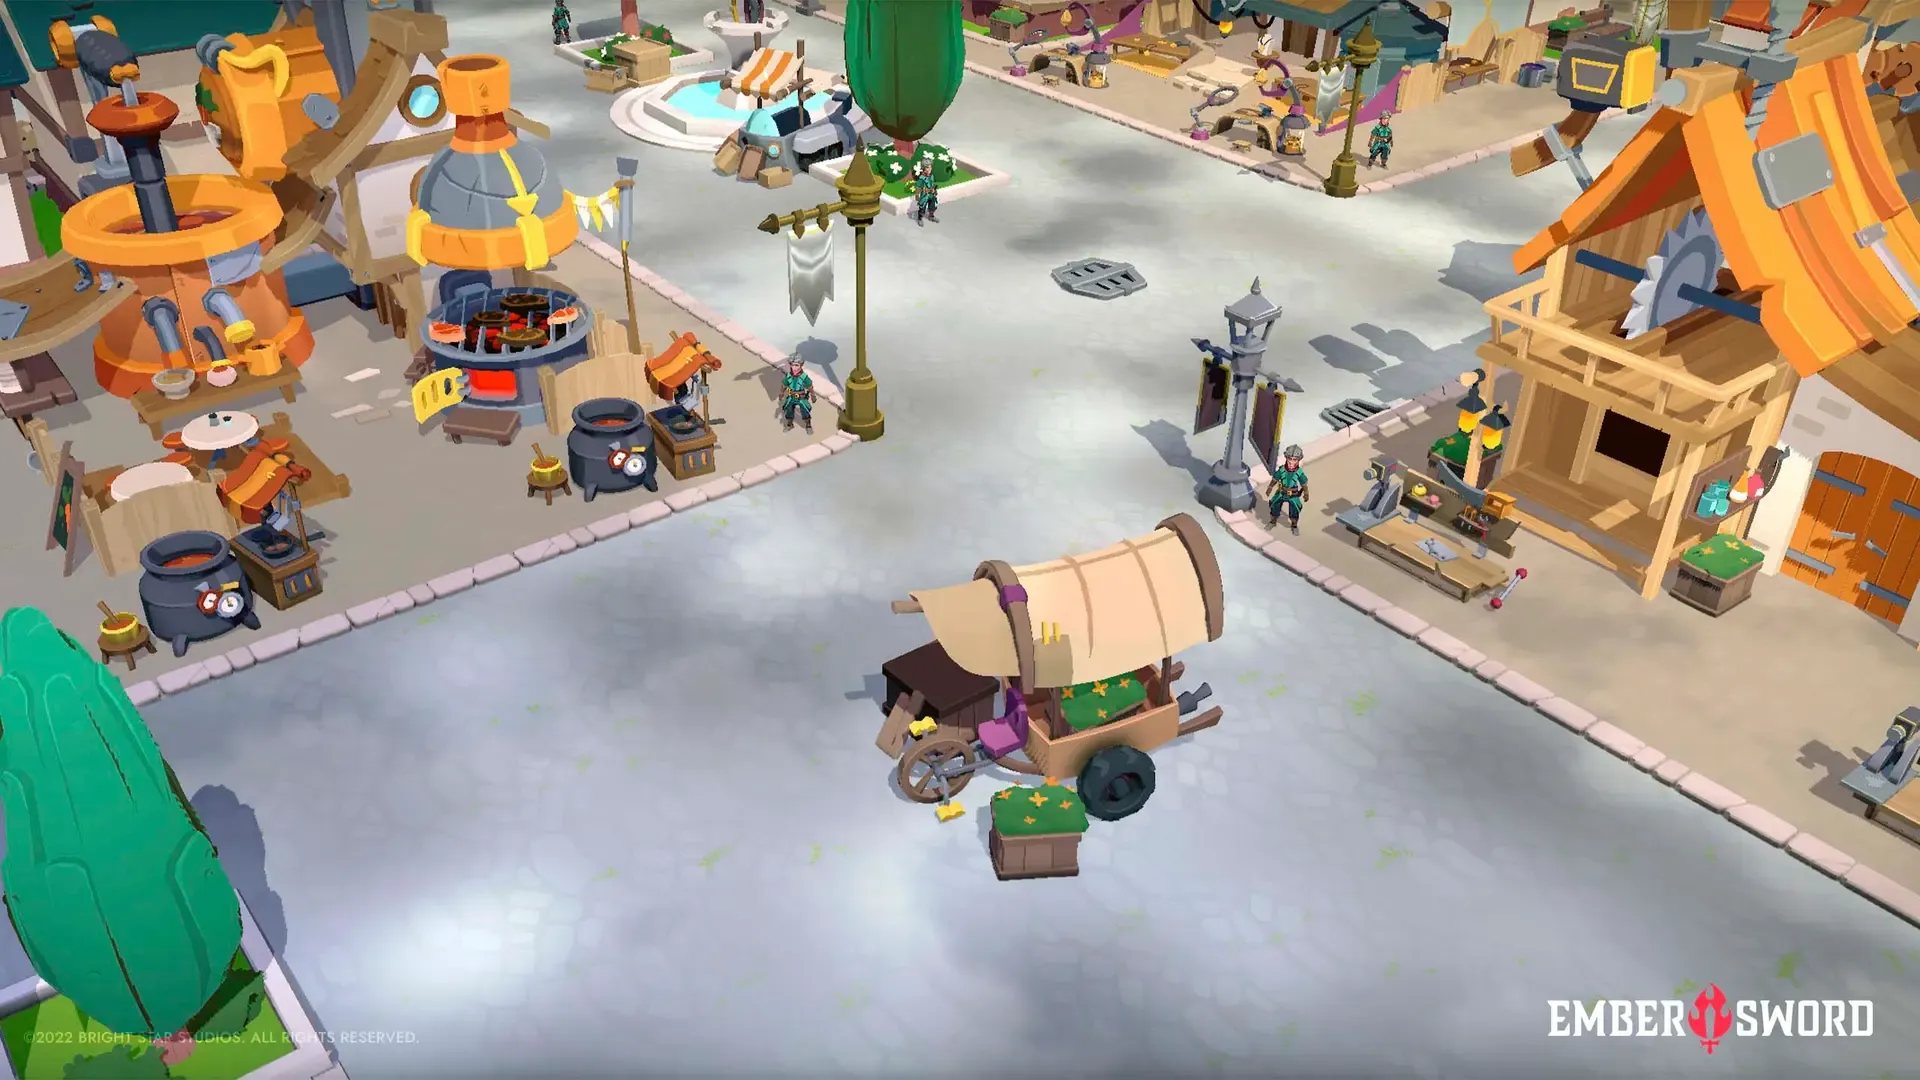 The image shows one of the towns in Ember Sword, an open-world MMORPG game where players can explore the world of Thanabus and prove their worth in battles.